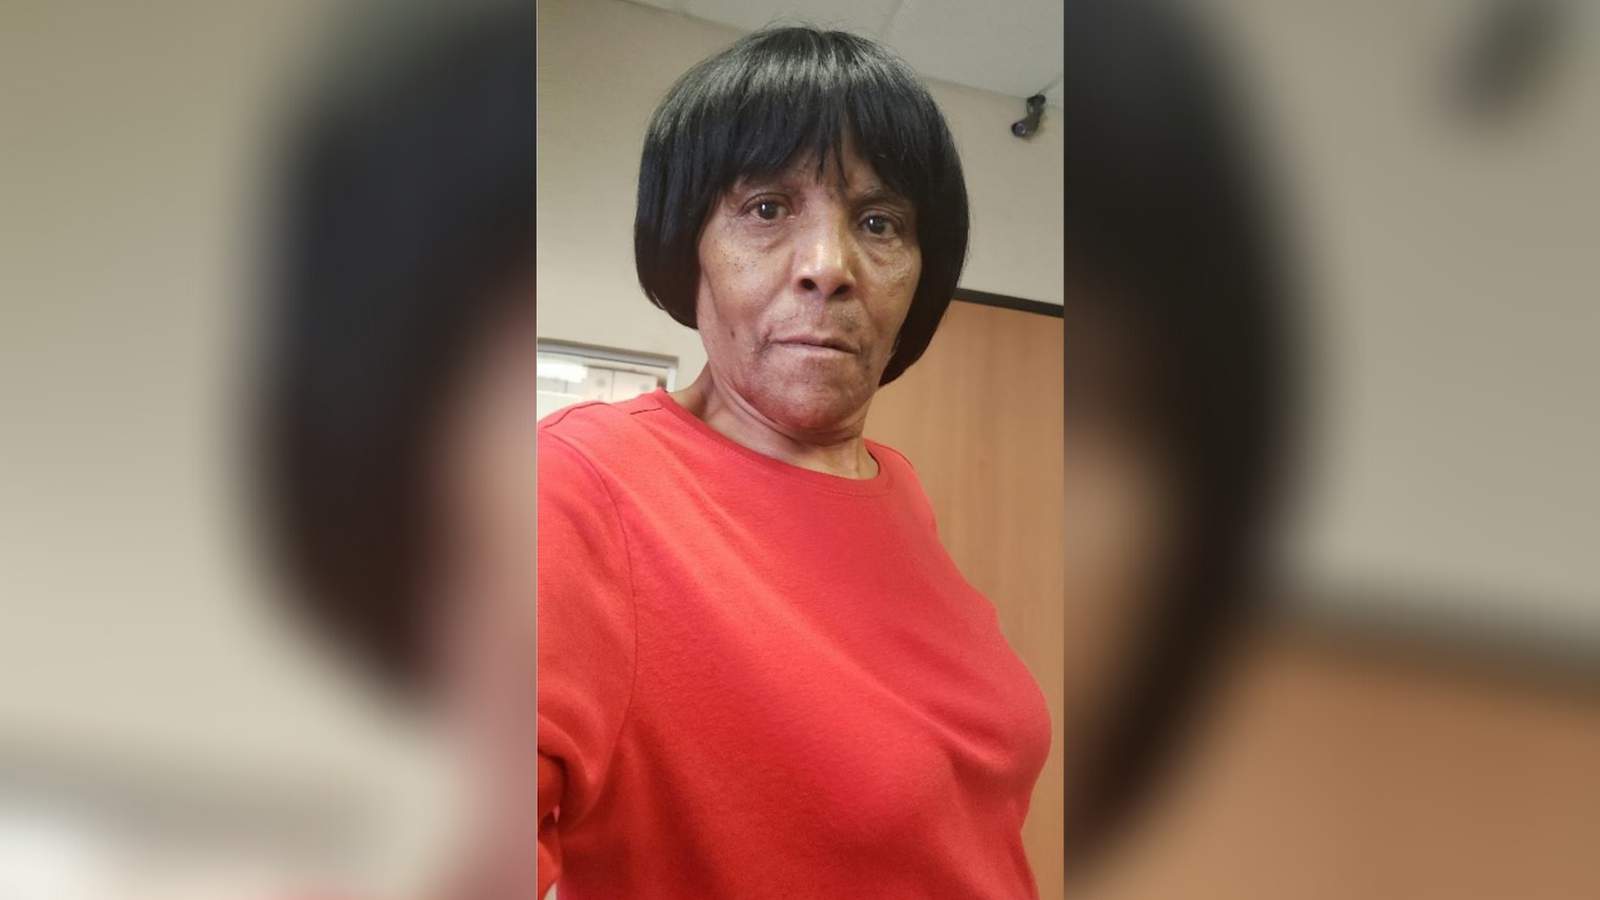 UPDATE: Silver Alert canceled after 72-year-old woman safely located